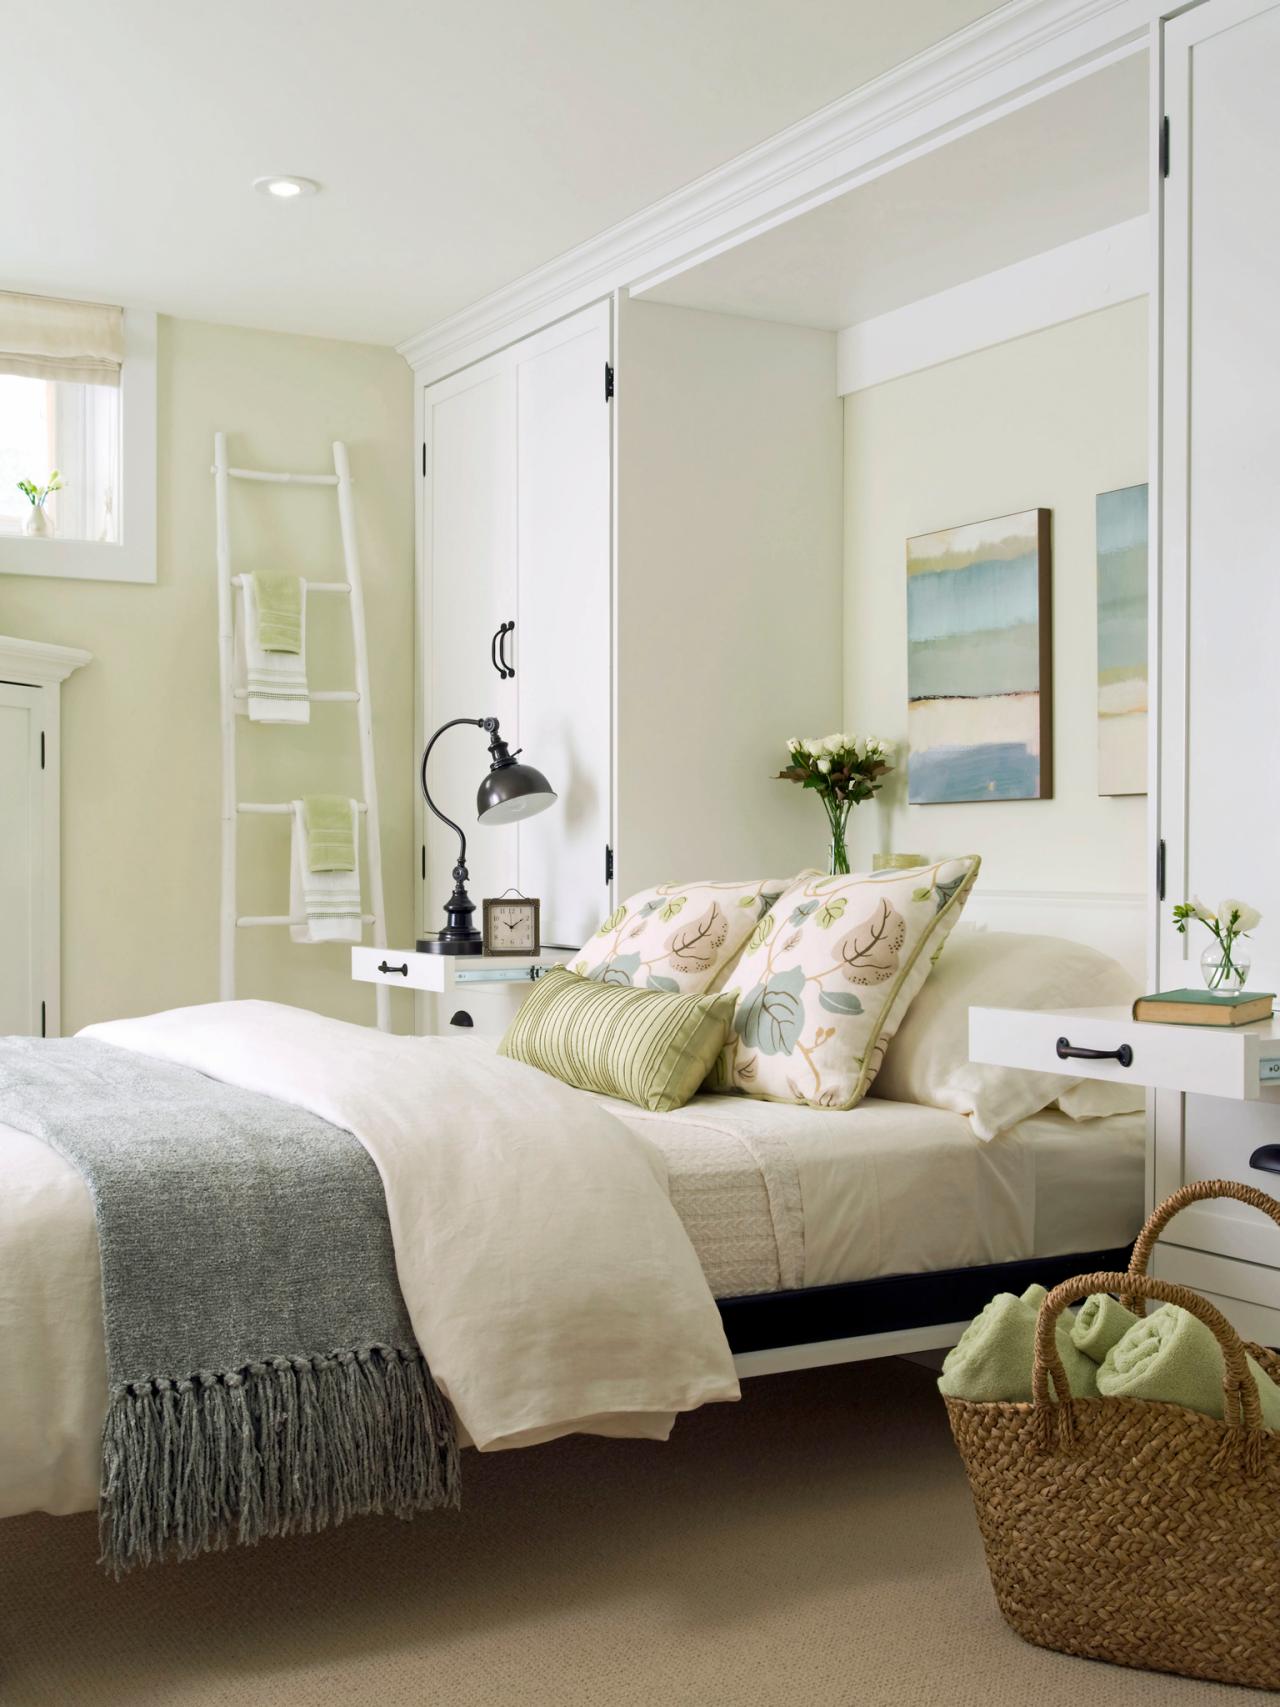 14 Ideas For Small Bedroom Decor Hgtv S Decorating Design Blog Hgtv With a limited amount of floor space or low ceilings, it can almost feel like you are trying to solve a puzzle. 14 ideas for small bedroom decor hgtv